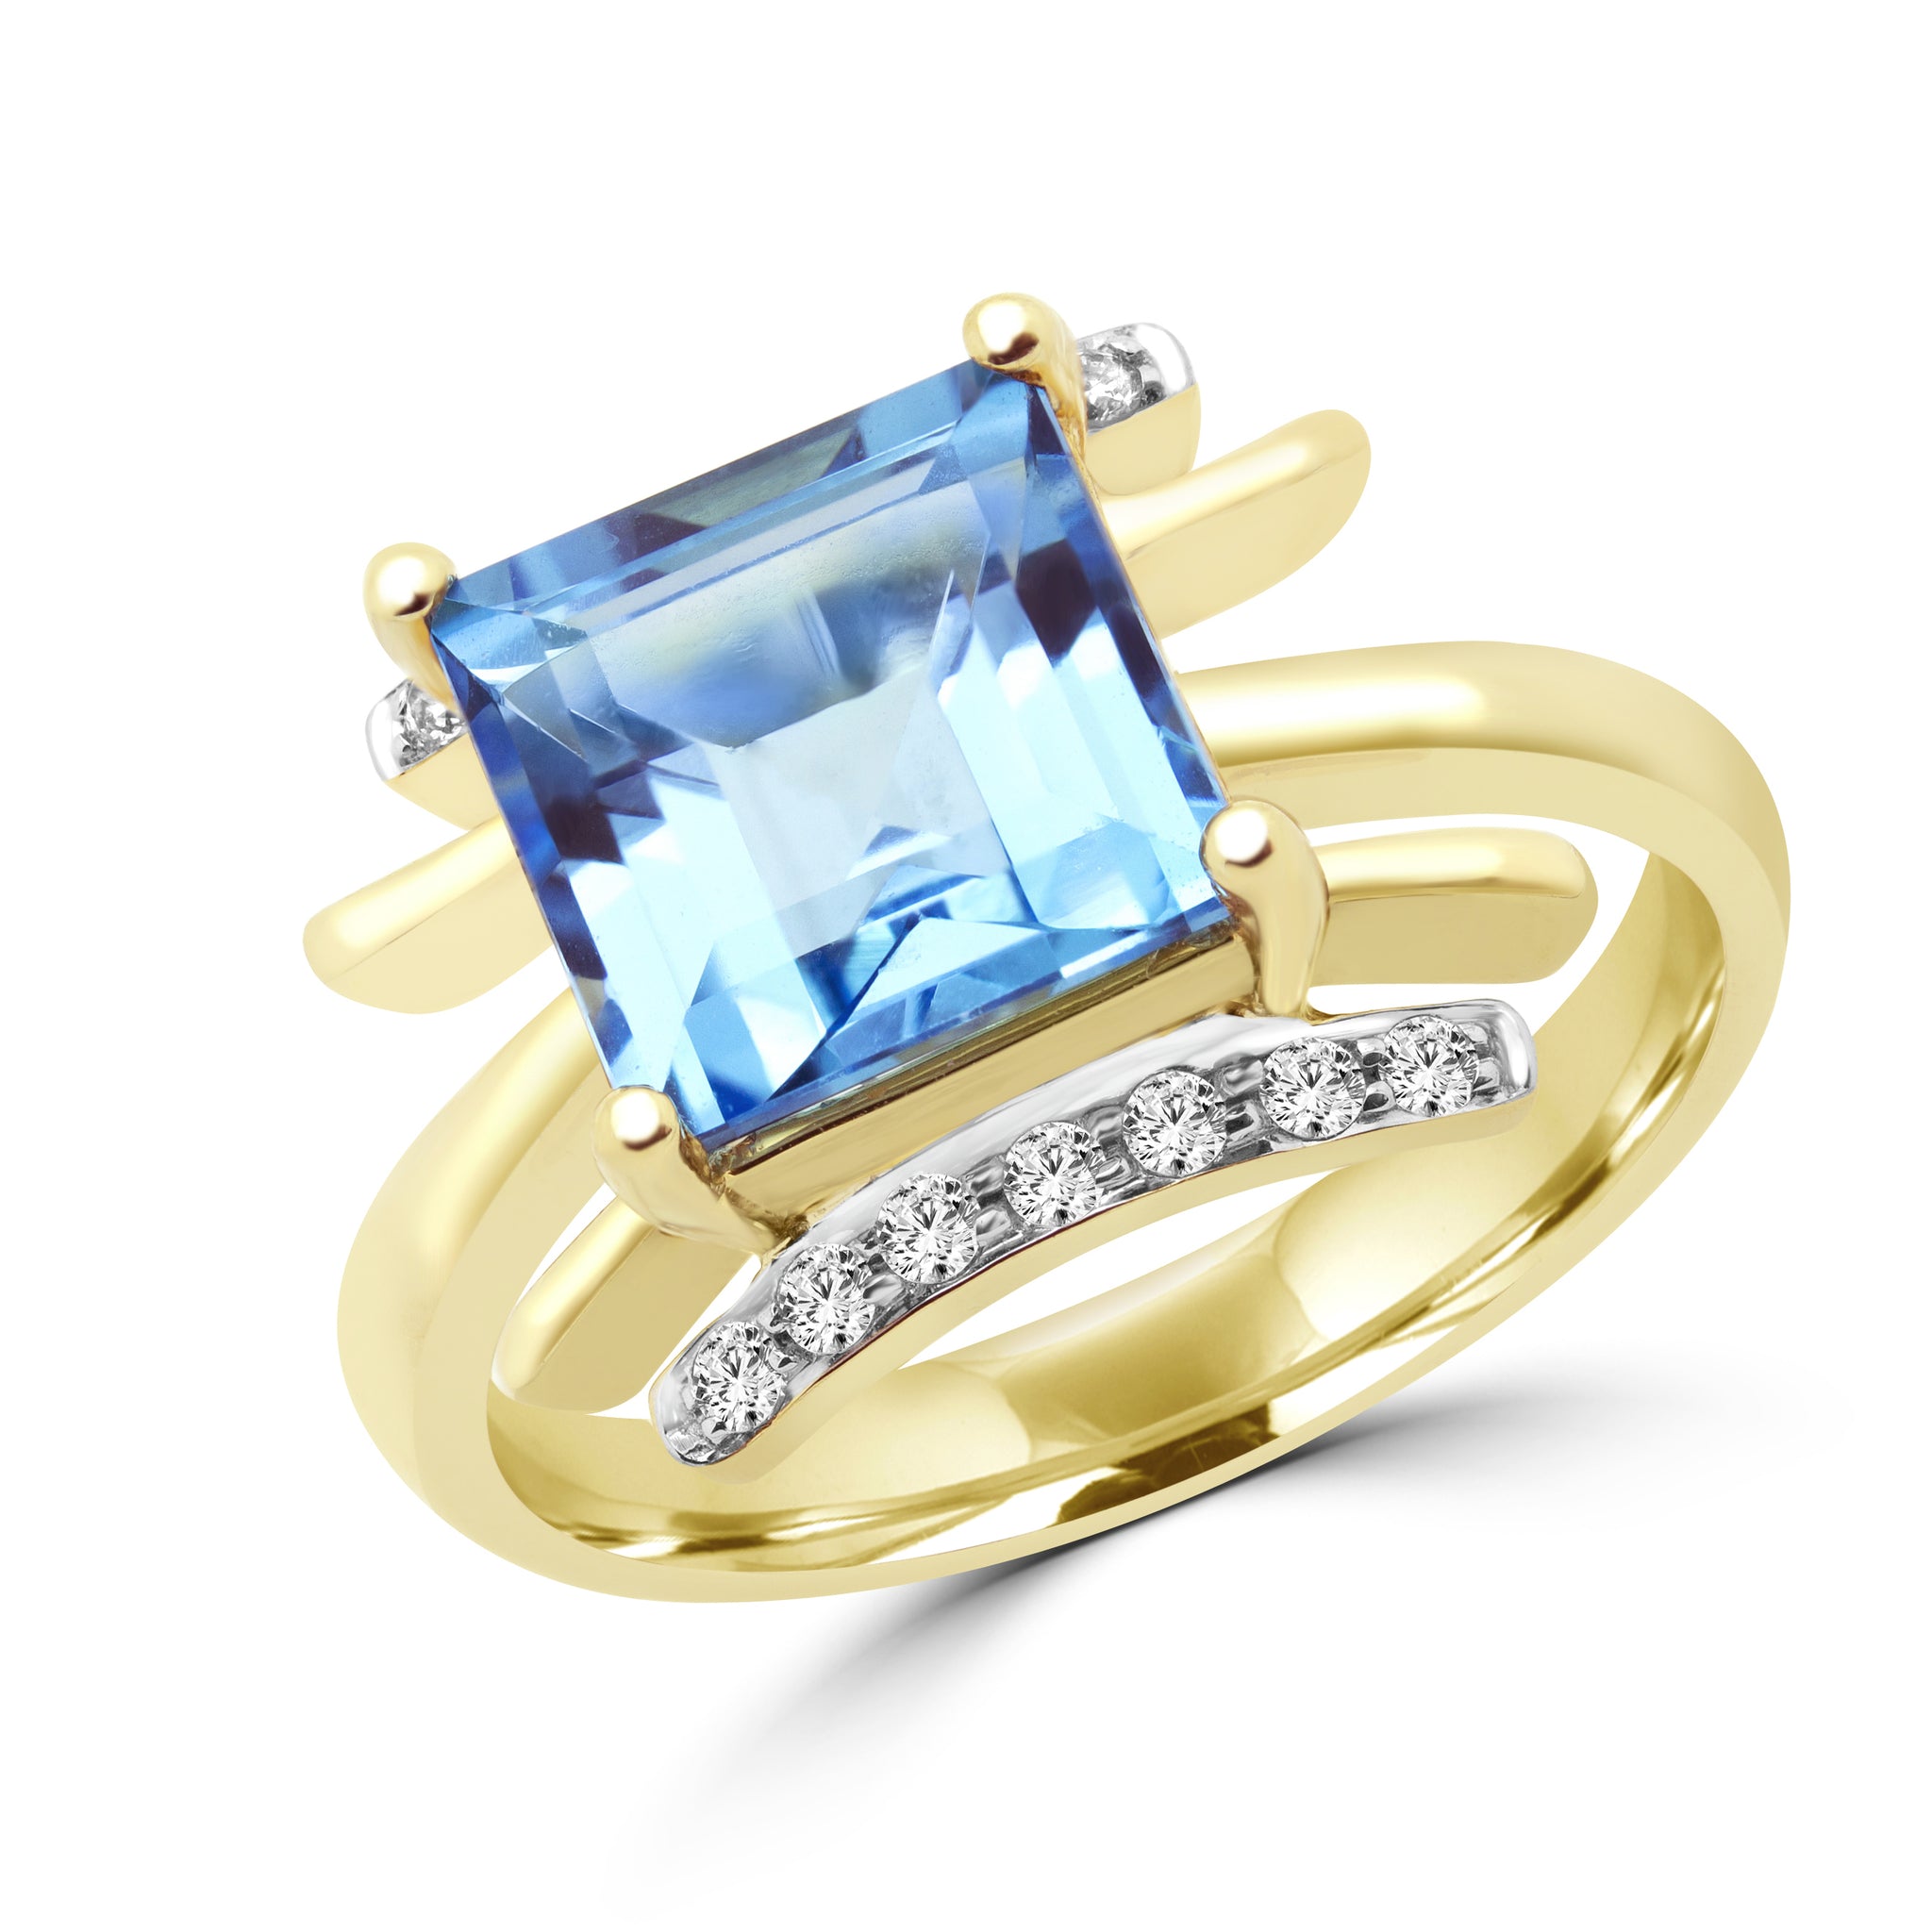 Emerald cut blue topaz & diamond cocktail ring in 10k yellow gold